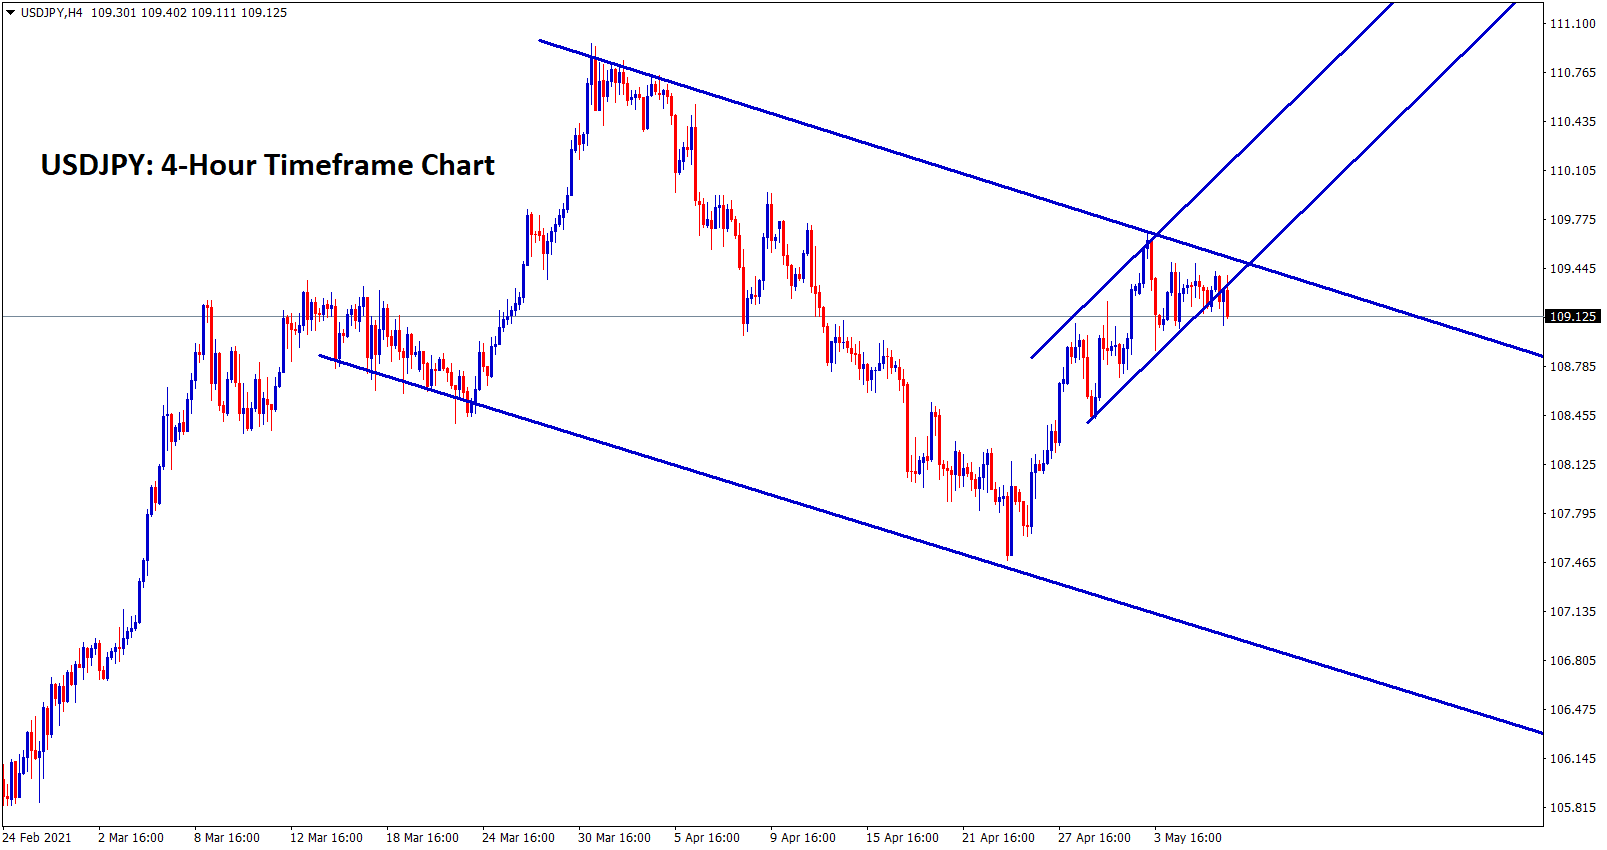 USDJPY trying to make a correction between the channel ranges